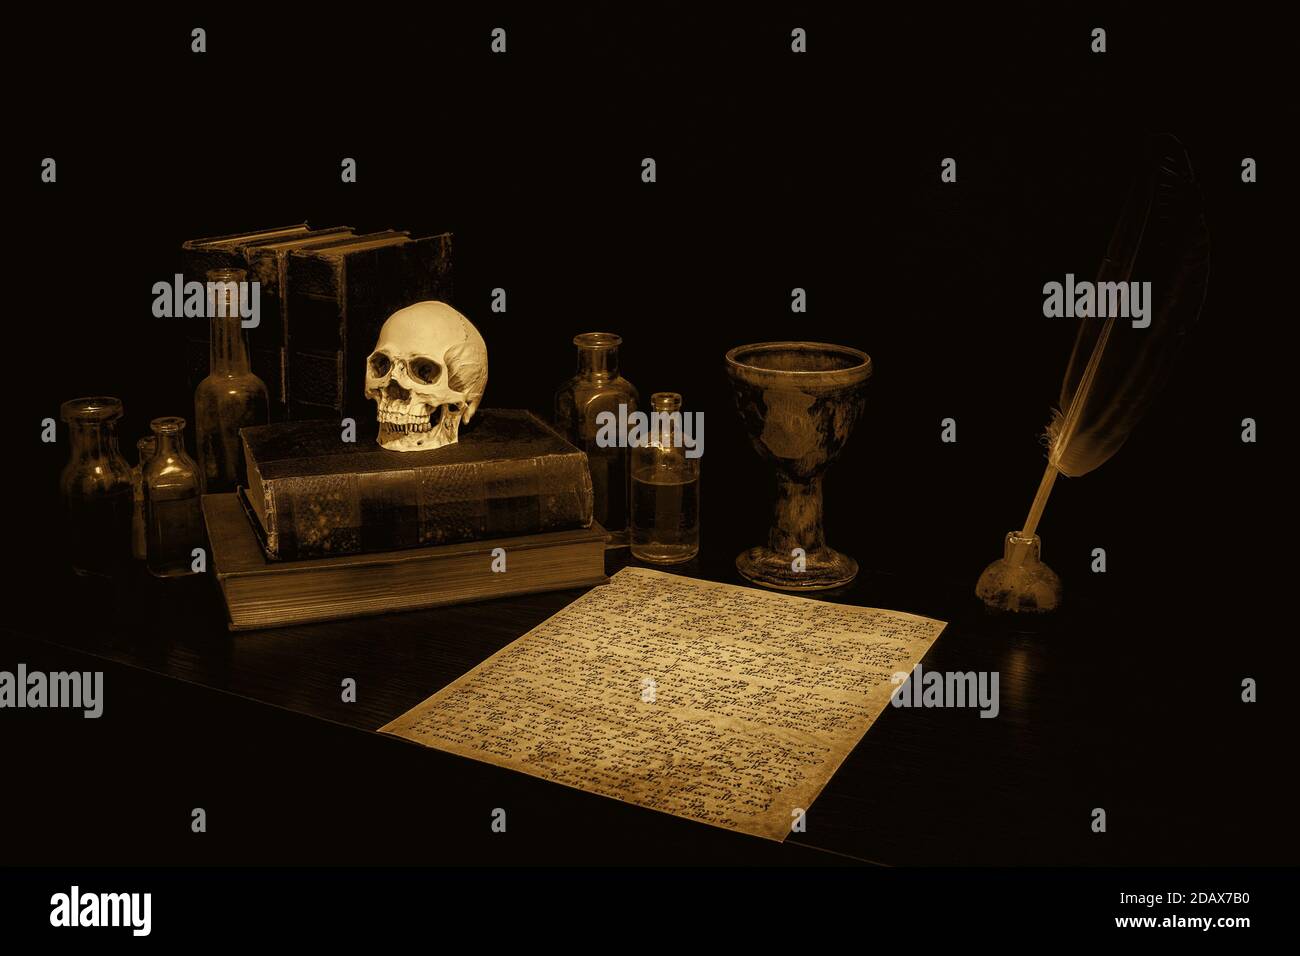 Old spooky desk in sepia, with parchment, feather pen, chalice, books, skull, and bottles. Parchment is arcane runes. Sepia antique atmosphere. Stock Photo